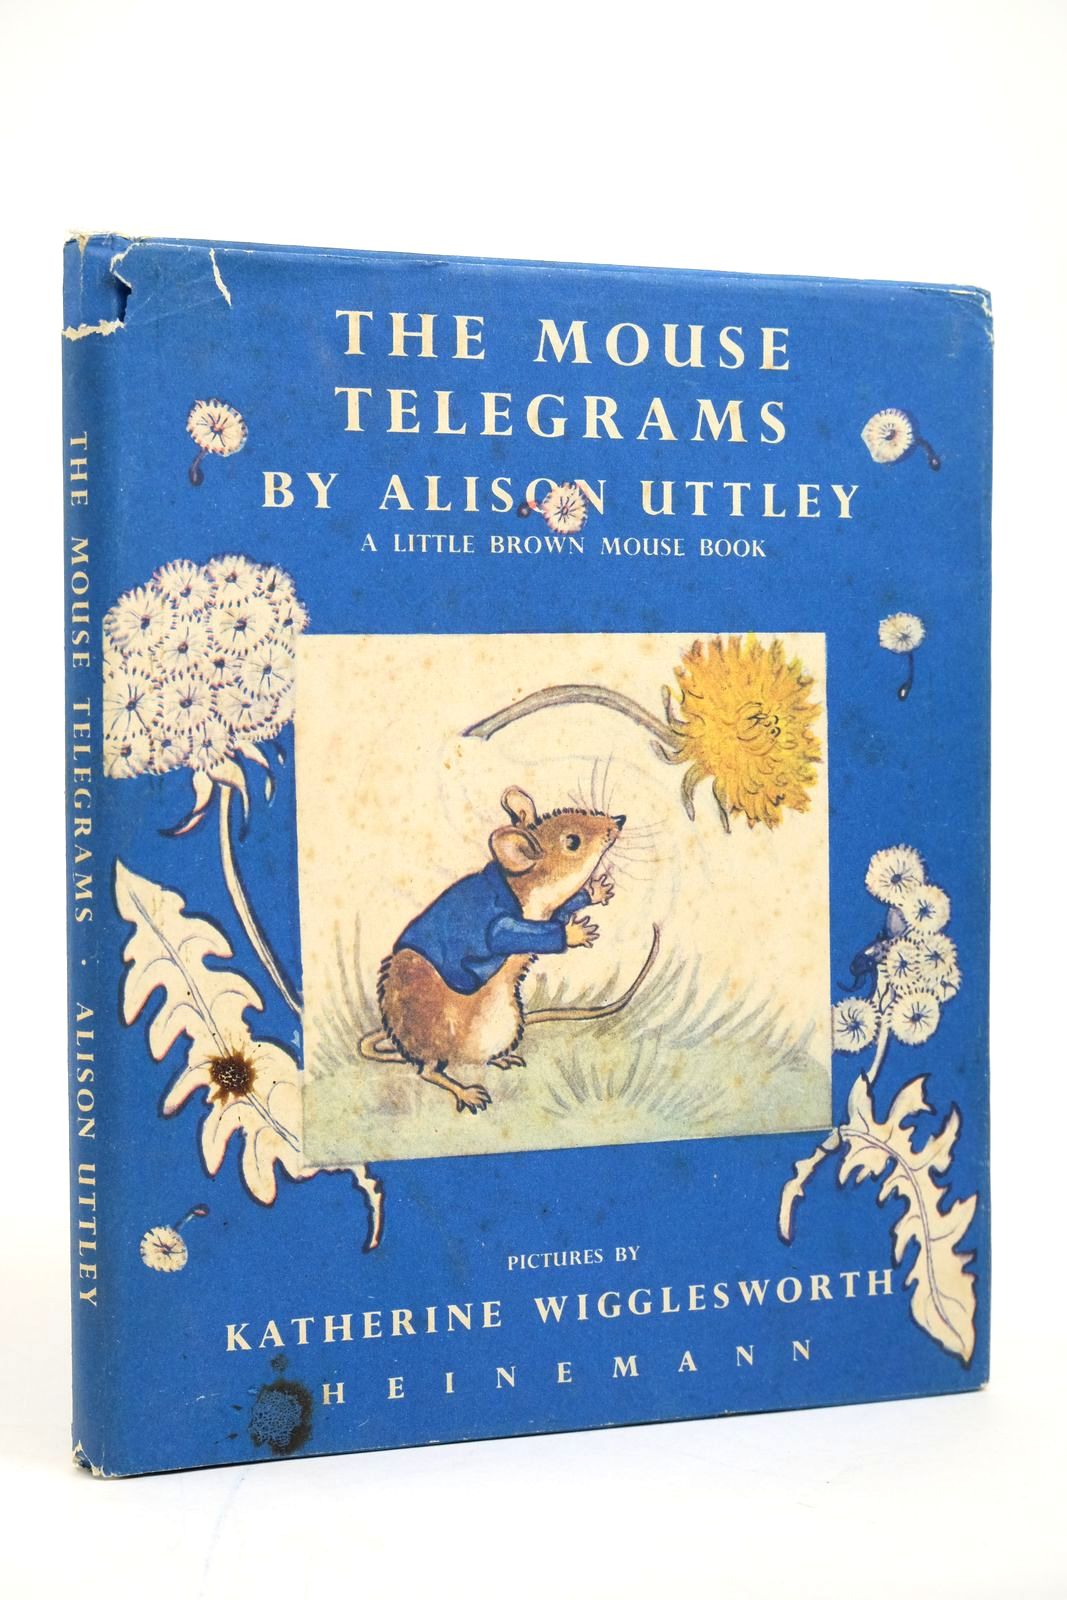 Photo of THE MOUSE TELEGRAMS written by Uttley, Alison illustrated by Wigglesworth, Katherine published by Heinemann (STOCK CODE: 2135084)  for sale by Stella & Rose's Books